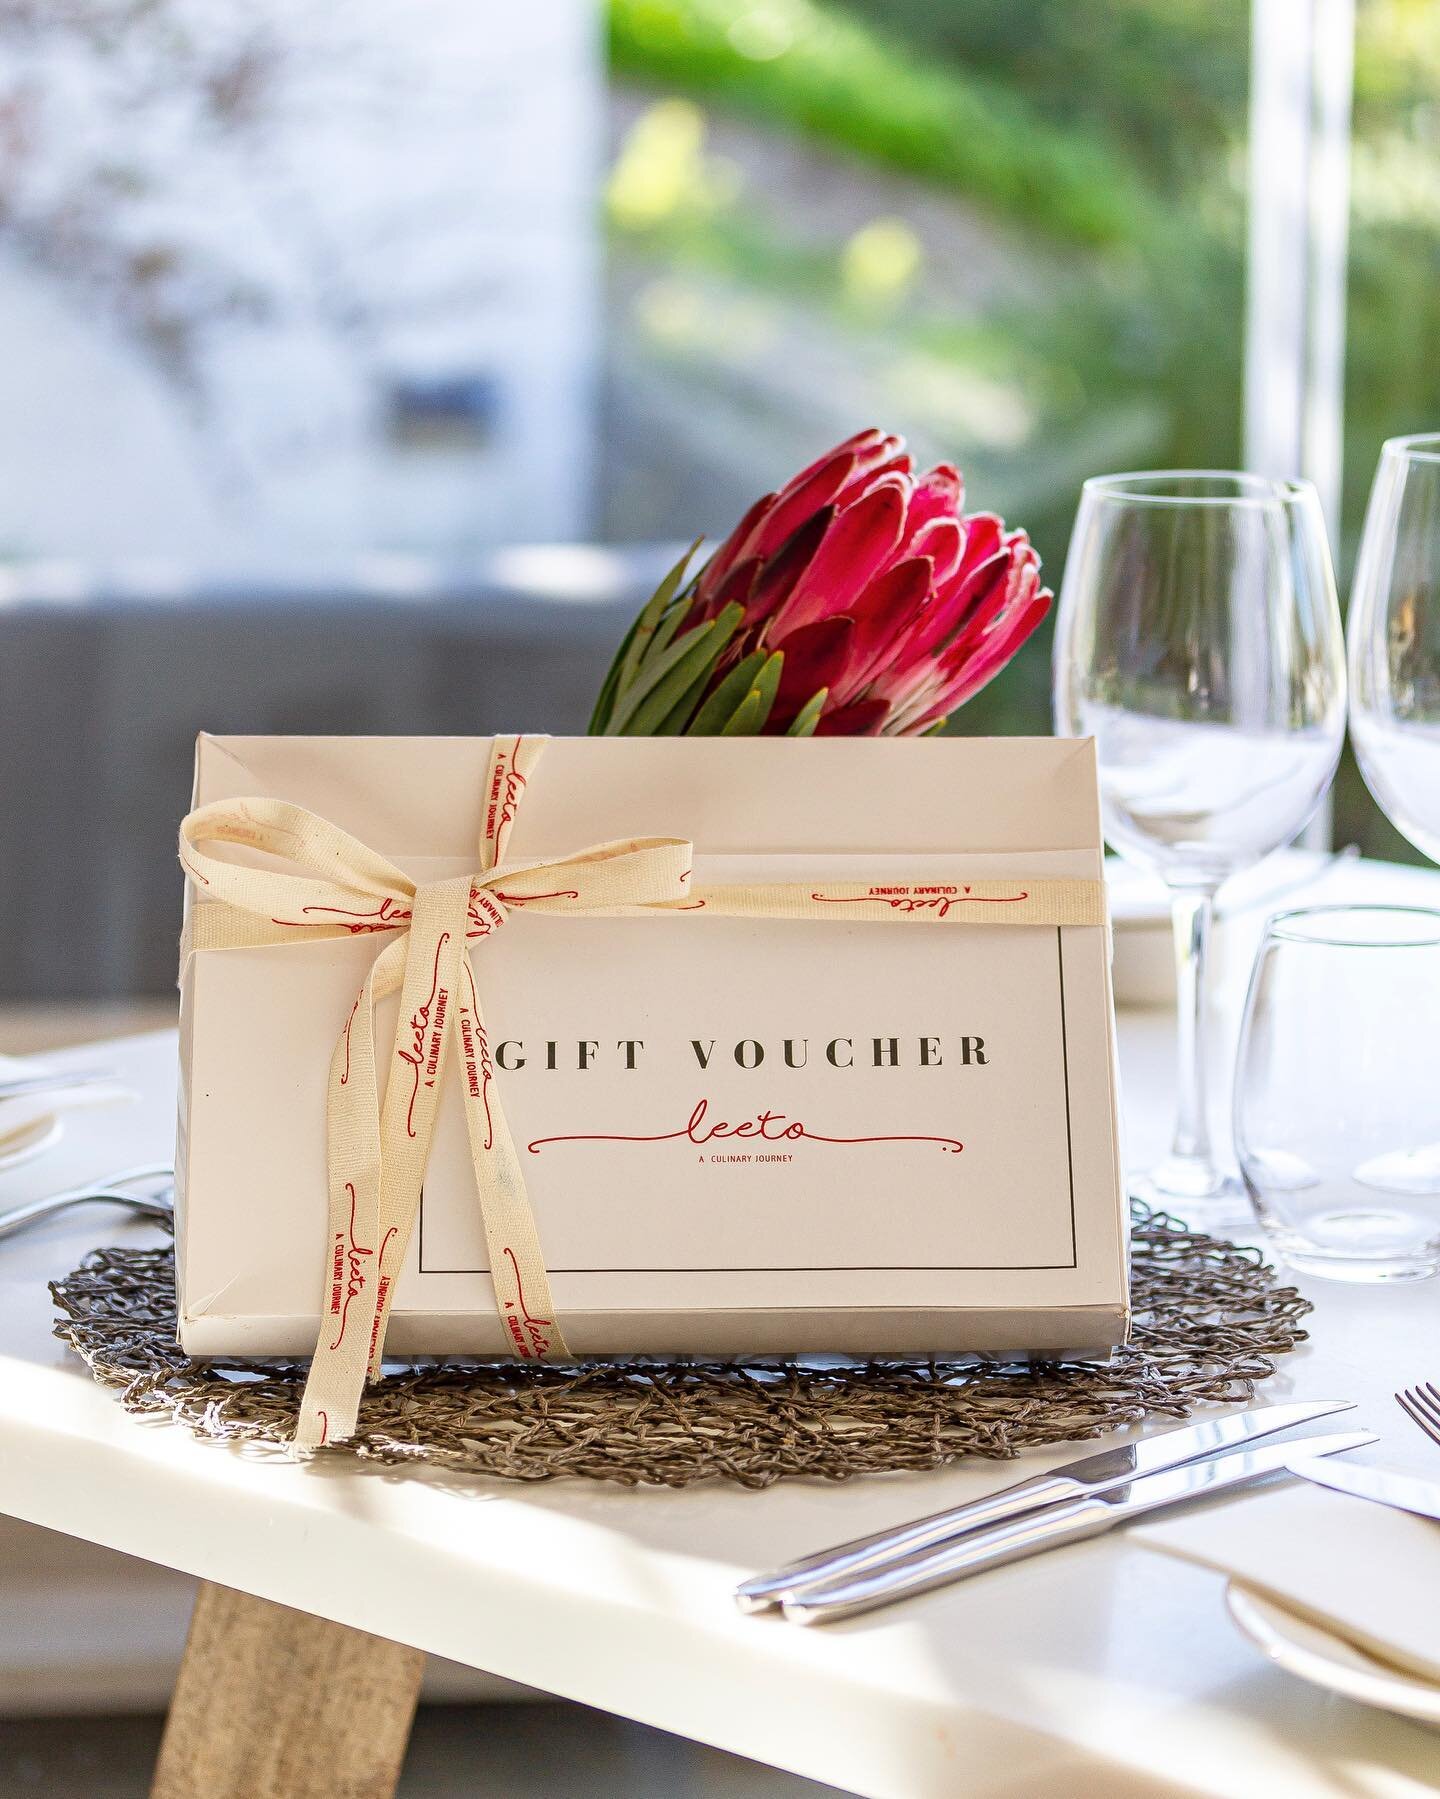 &lsquo;Collect memories, not things.&rsquo; 
 
As we inch closer to festive season, a reminder that we&rsquo;re proud to offer gift vouchers as the ideal gift for loved ones, foodie friends, colleagues and corporates 🎁
 
Enquire now and allow us to 